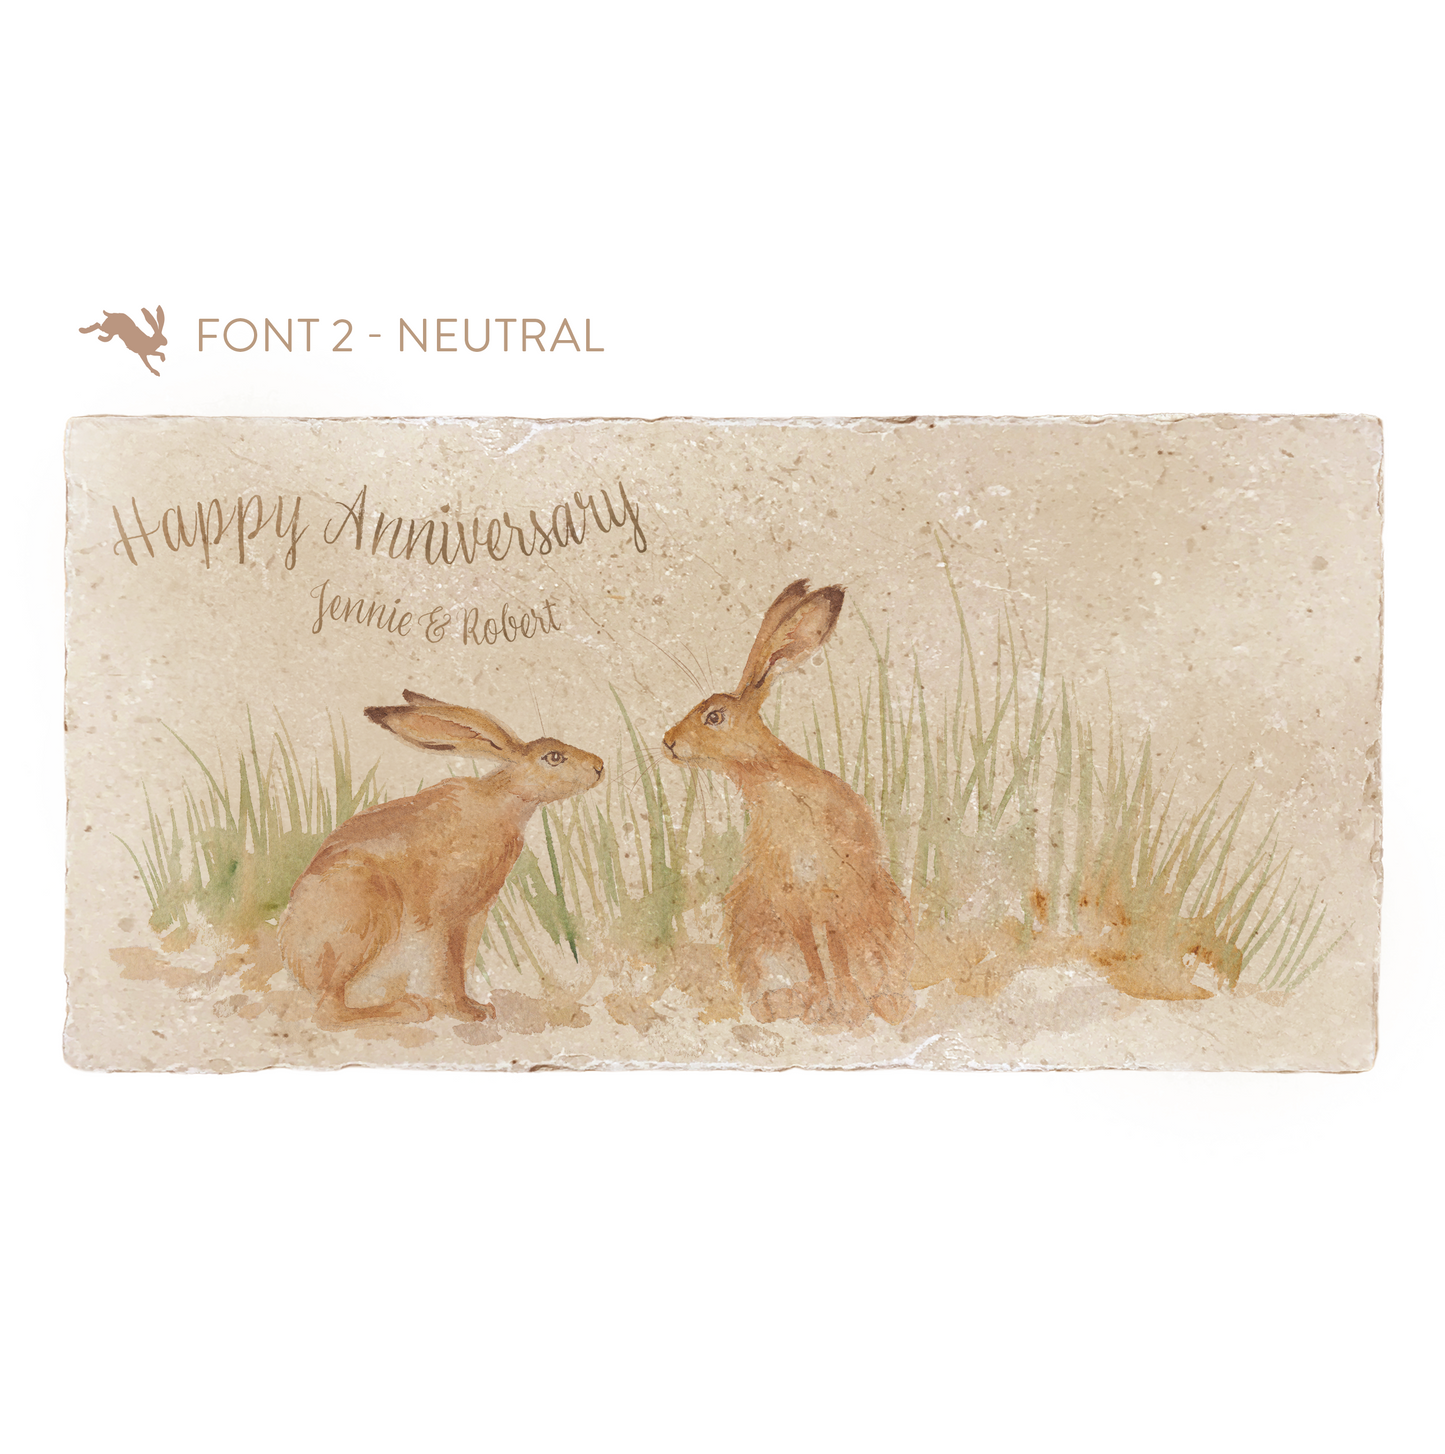 A personalised rectangular marble sharing platter featuring a two kissing hares in a watercolour style. The example personalised neutral colour text reads ‘Happy Anniversary, Jennie & Robert’ in an elegant script font.